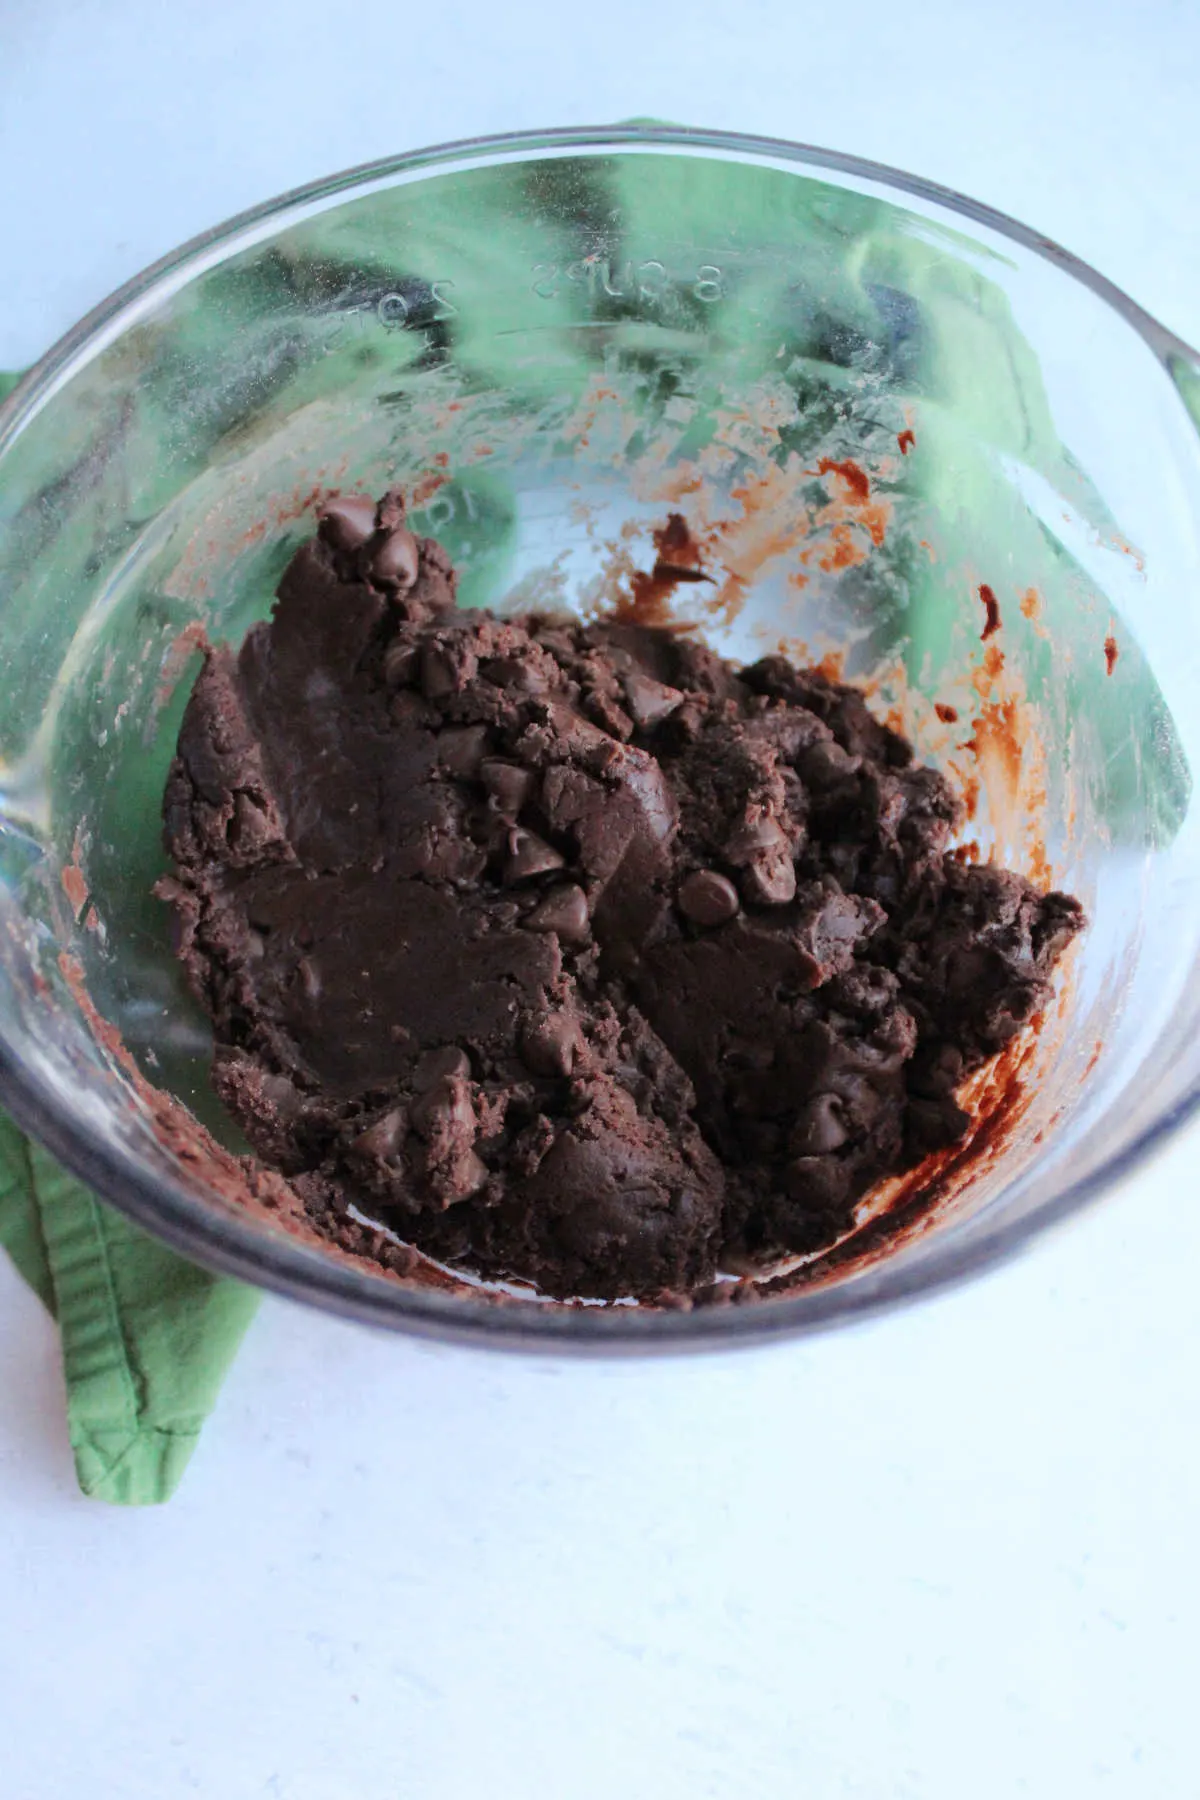 Bowl of thick chocolate cookie dough with chocolate chips.